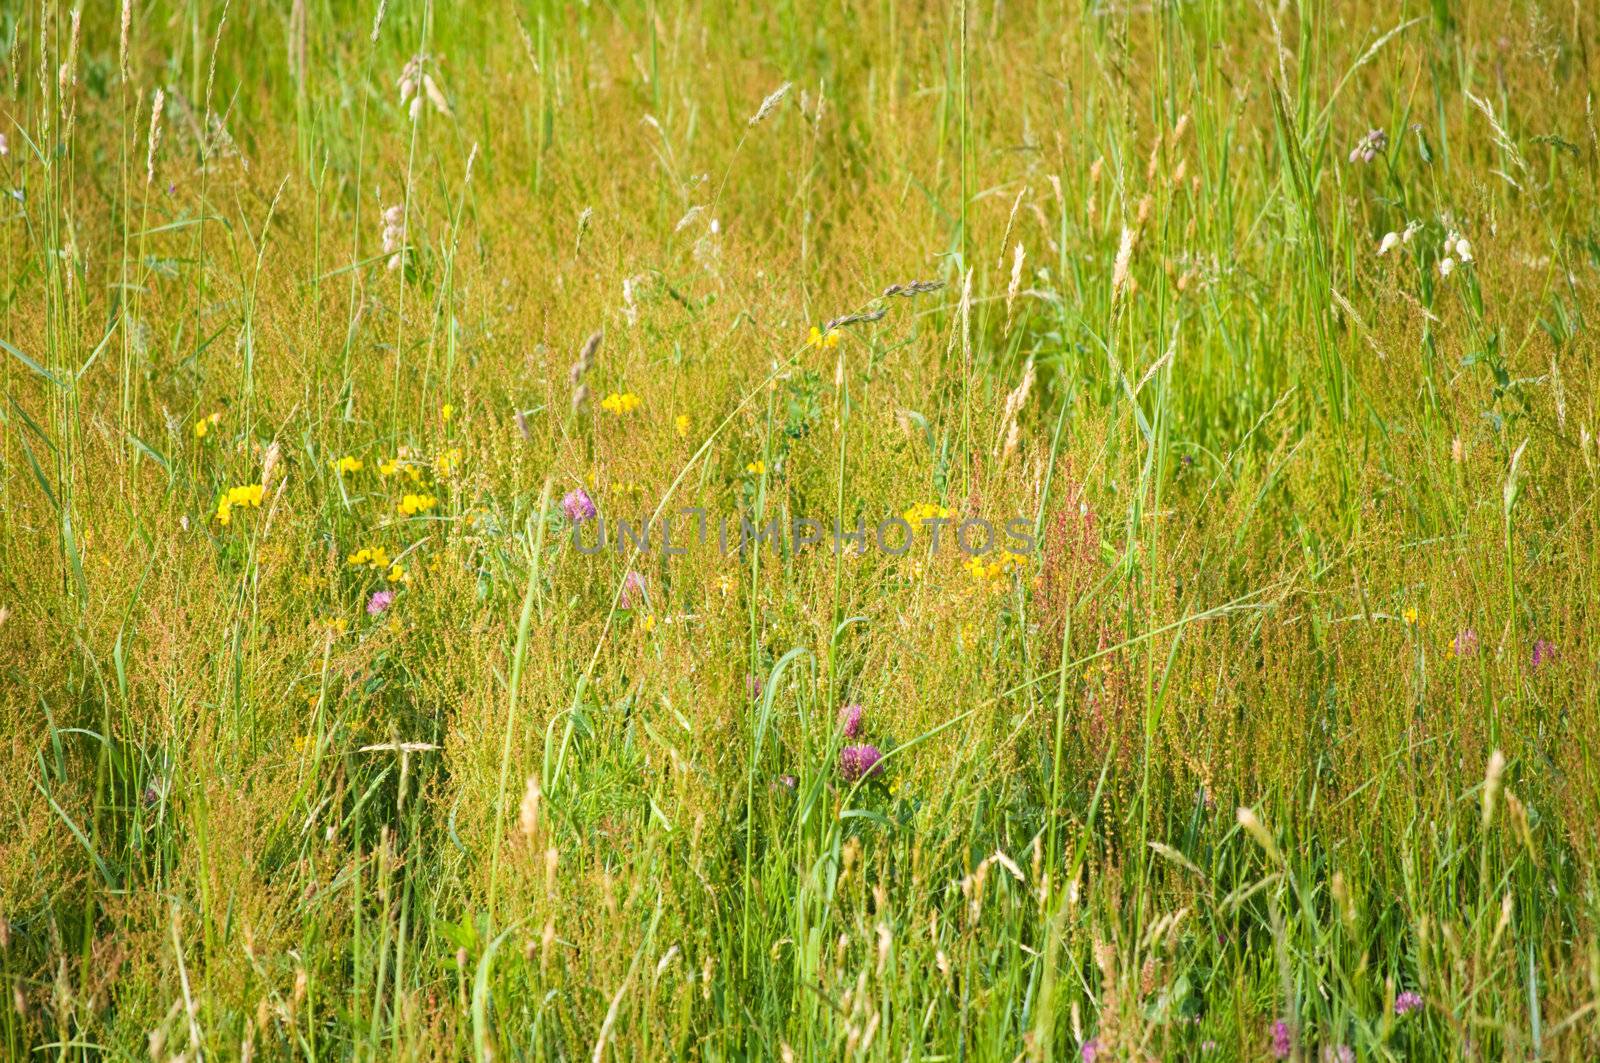 Tall grass with flowers